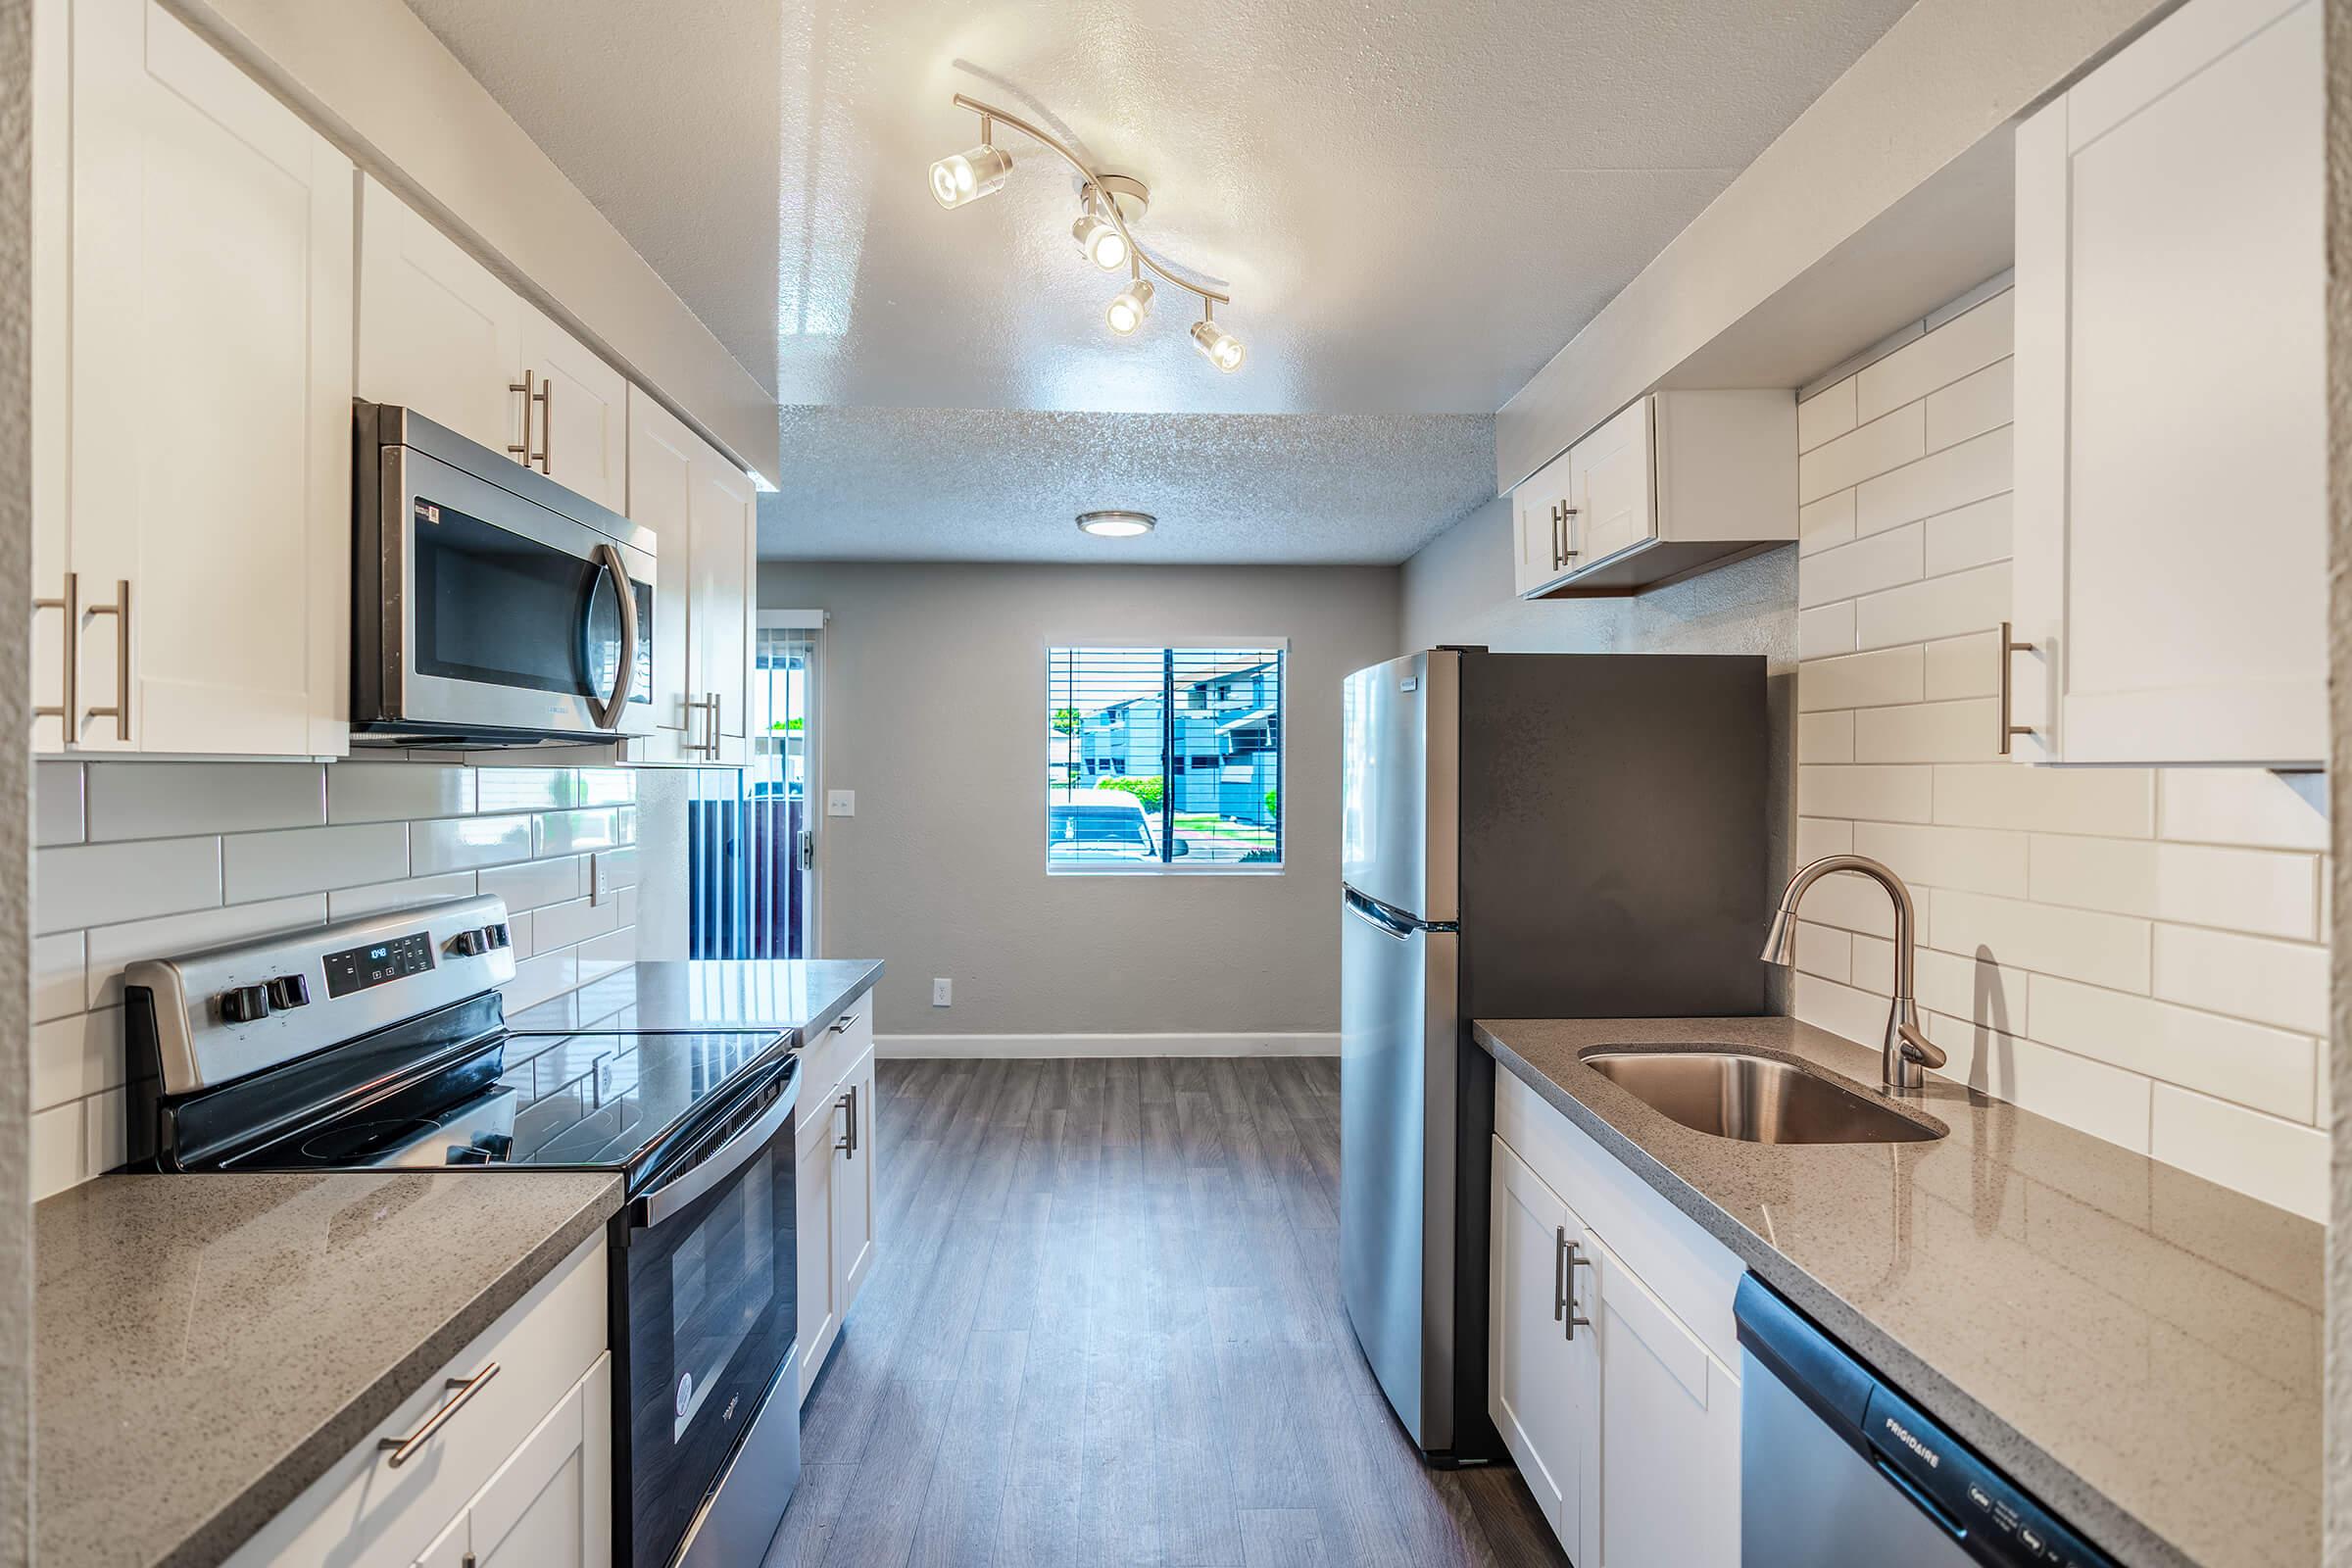 Galley way renovated kitchen with white cabinets, stainless steel appliances and white back splash